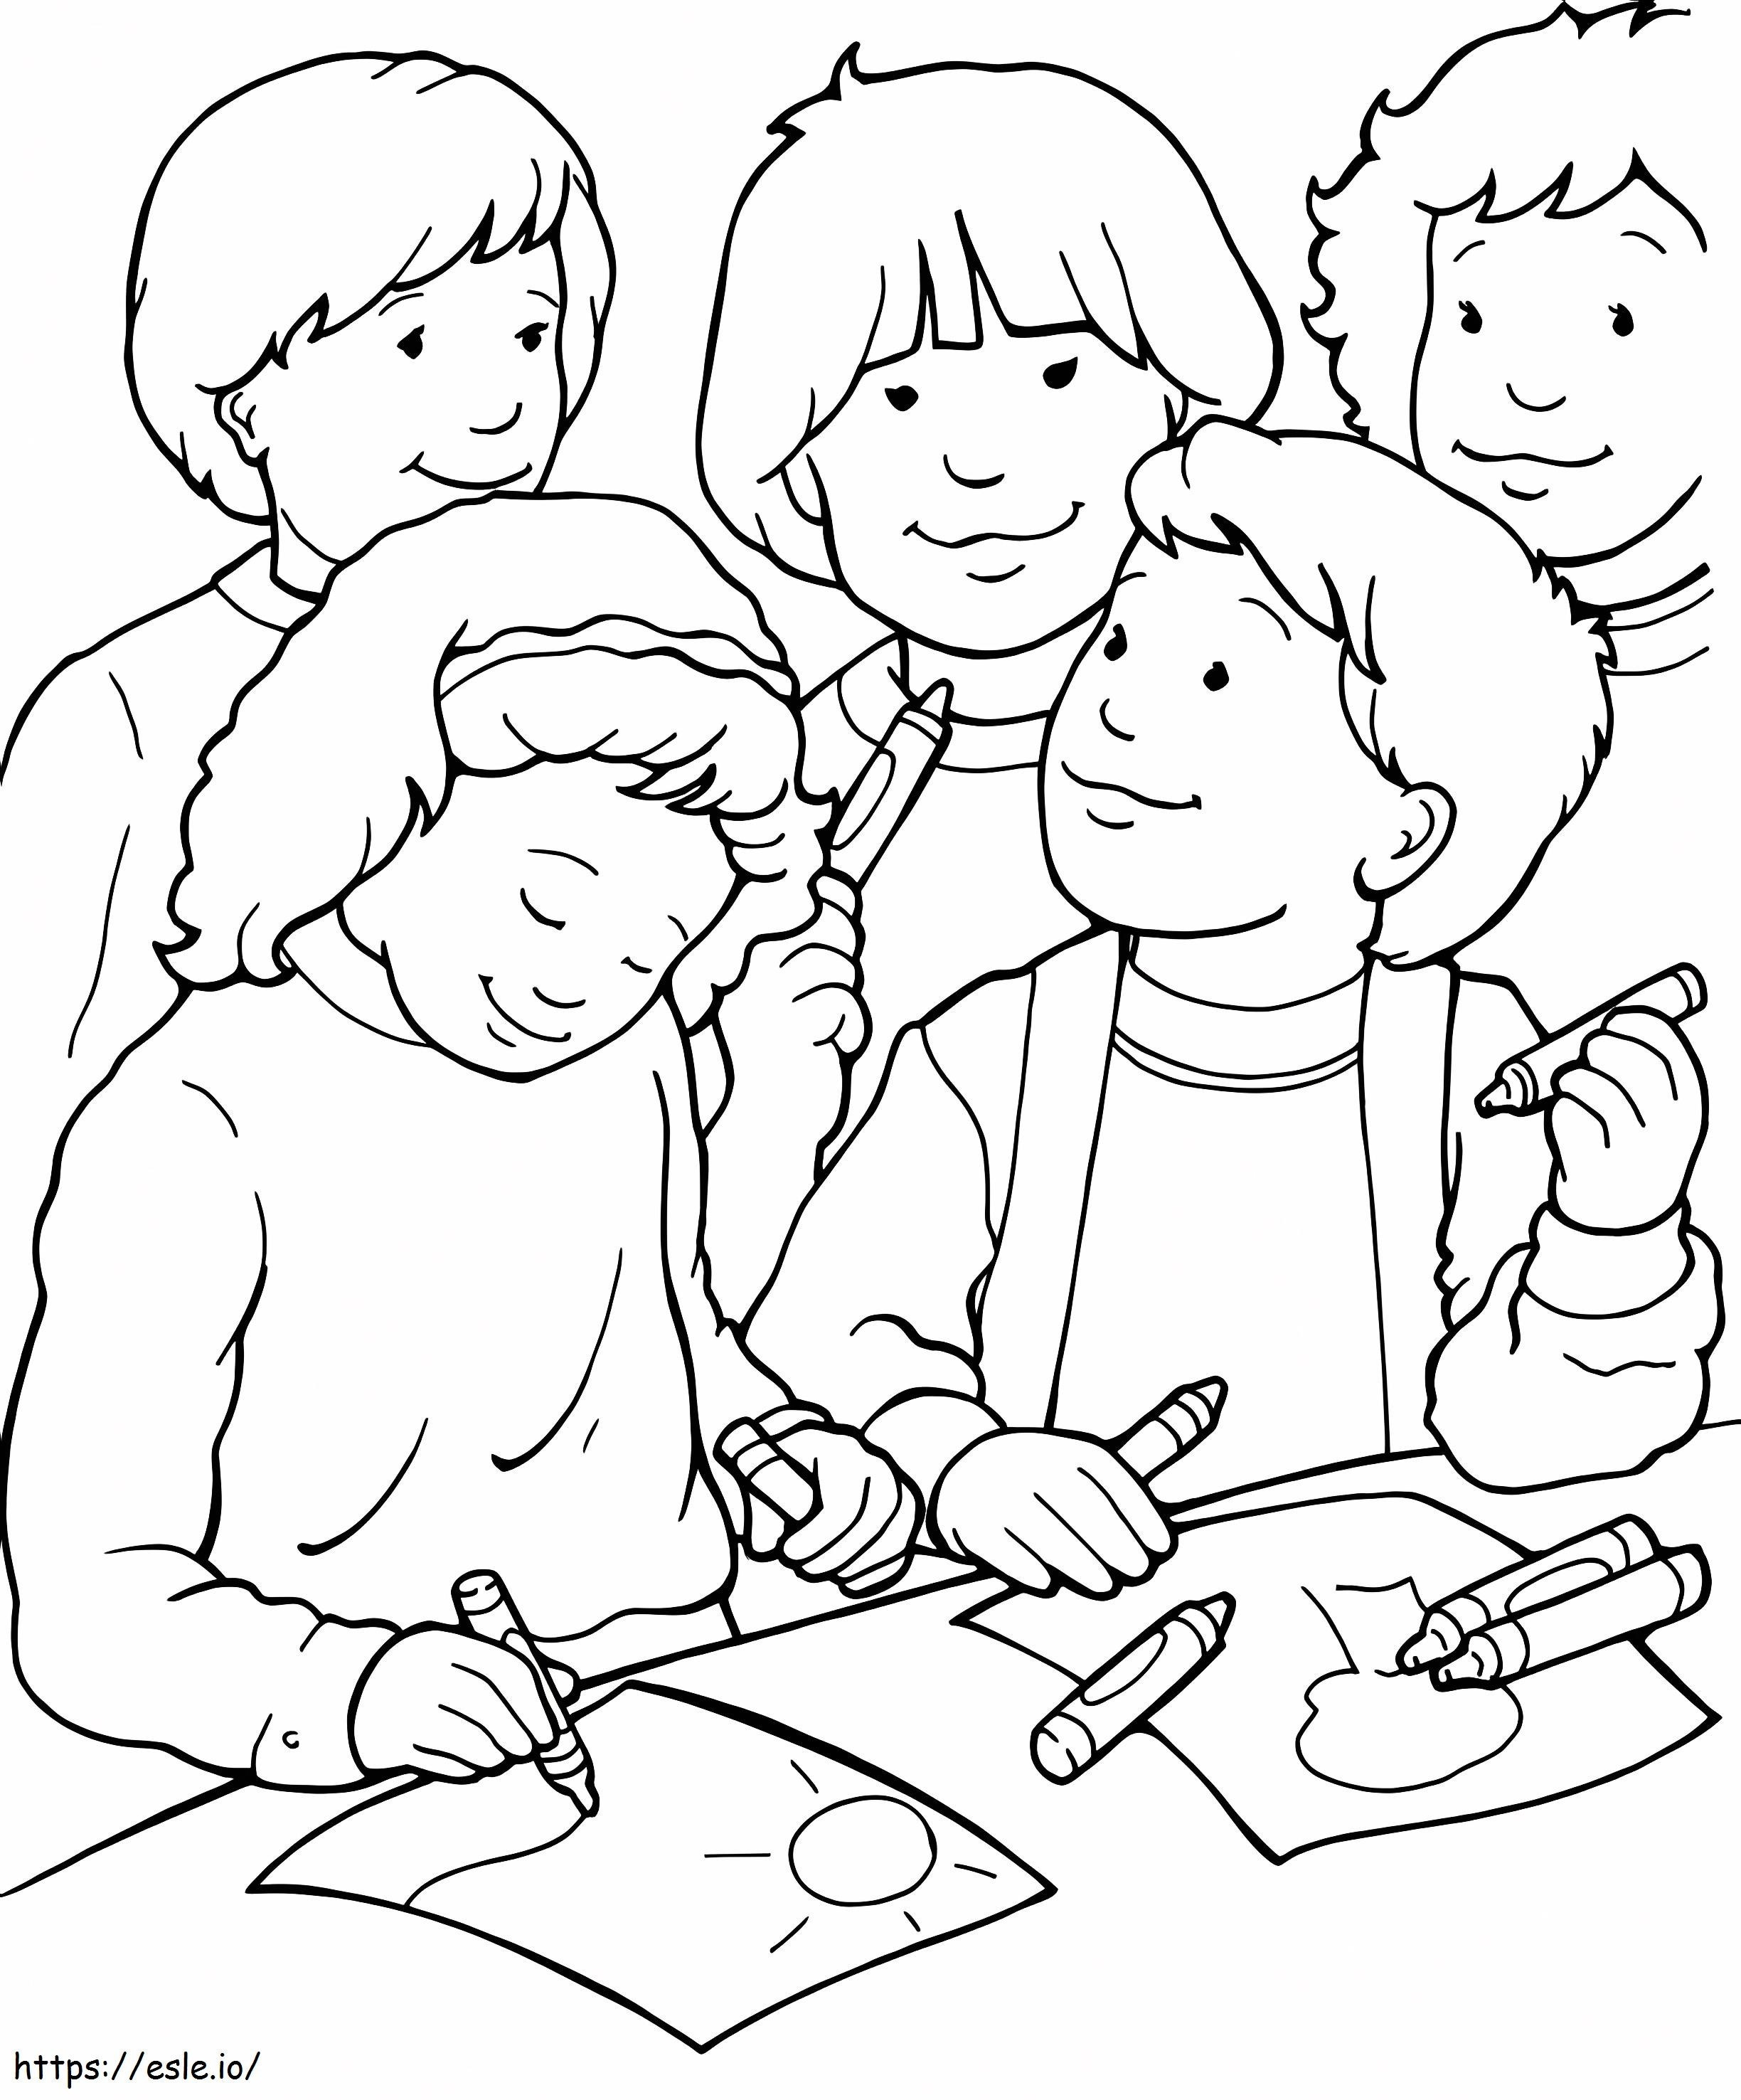 Friendship 9 coloring page